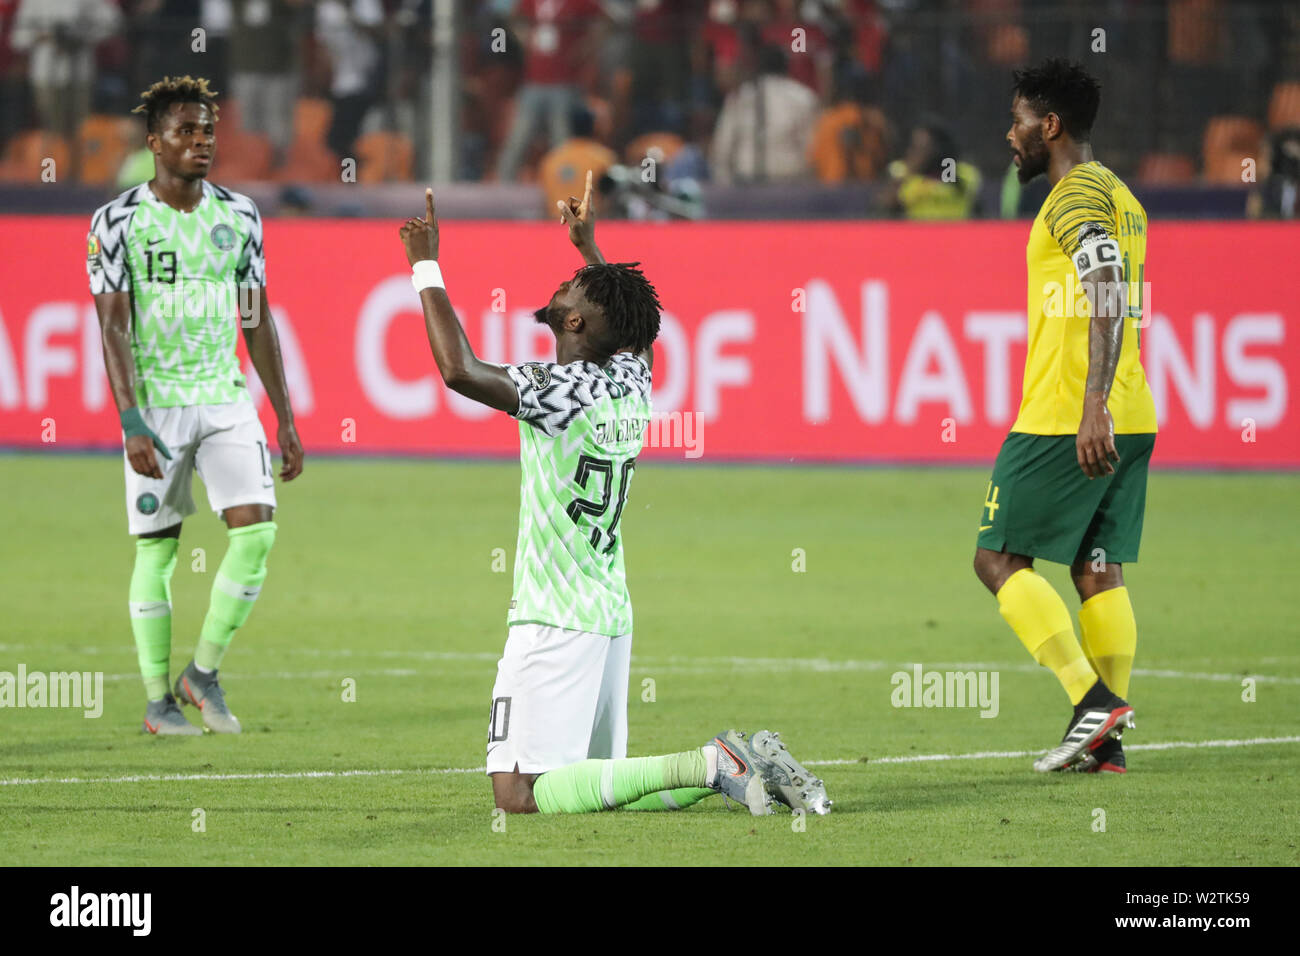 Cairo, Egypt. 10th July, 2019. Nigeria's Chidozie Awaziem (C) celebrates his team's victory after the 2019 Africa Cup of Nations quarter final soccer match between Nigeria and South Africa at the Cairo International Stadium. Credit: Oliver Weiken/dpa/Alamy Live News Stock Photo